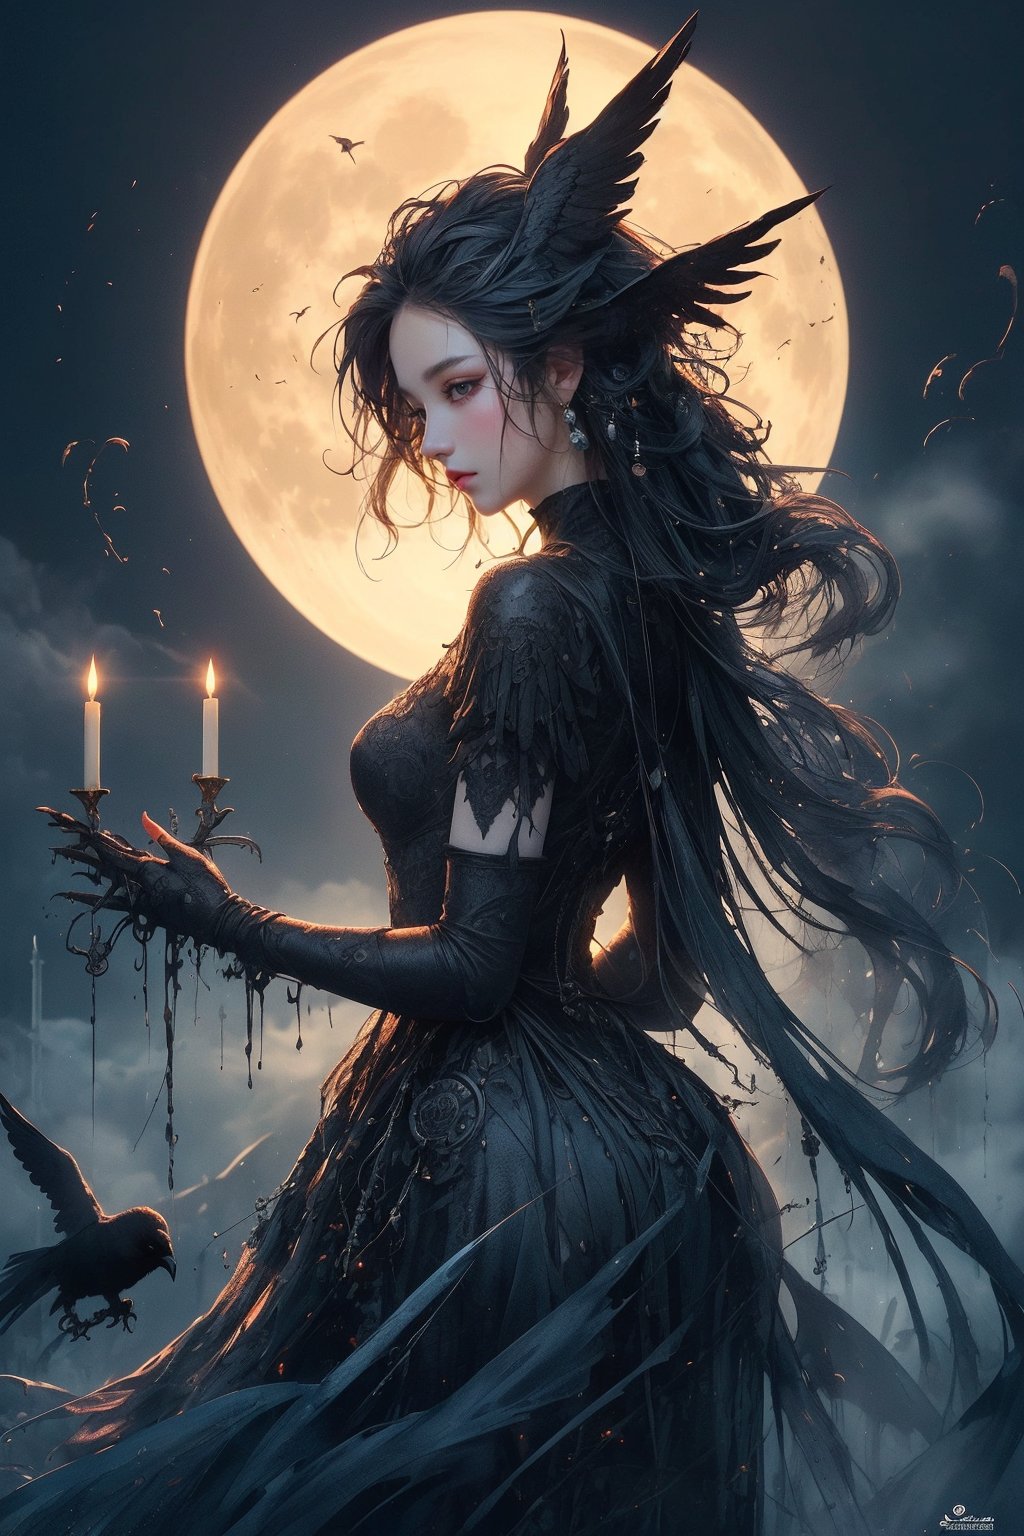 A hauntingly beautiful image: a female version of Edward Scissorhands stands alone on a misty, moonlit night. Her raven-black hair cascades down her back like a dark waterfall, framing the pale, porcelain complexion. The iconic scissorhands grasp and release, as if sculpting the very air around her. In the background, gothic spires pierce the darkness, while eerie, flickering candles cast an otherworldly glow.